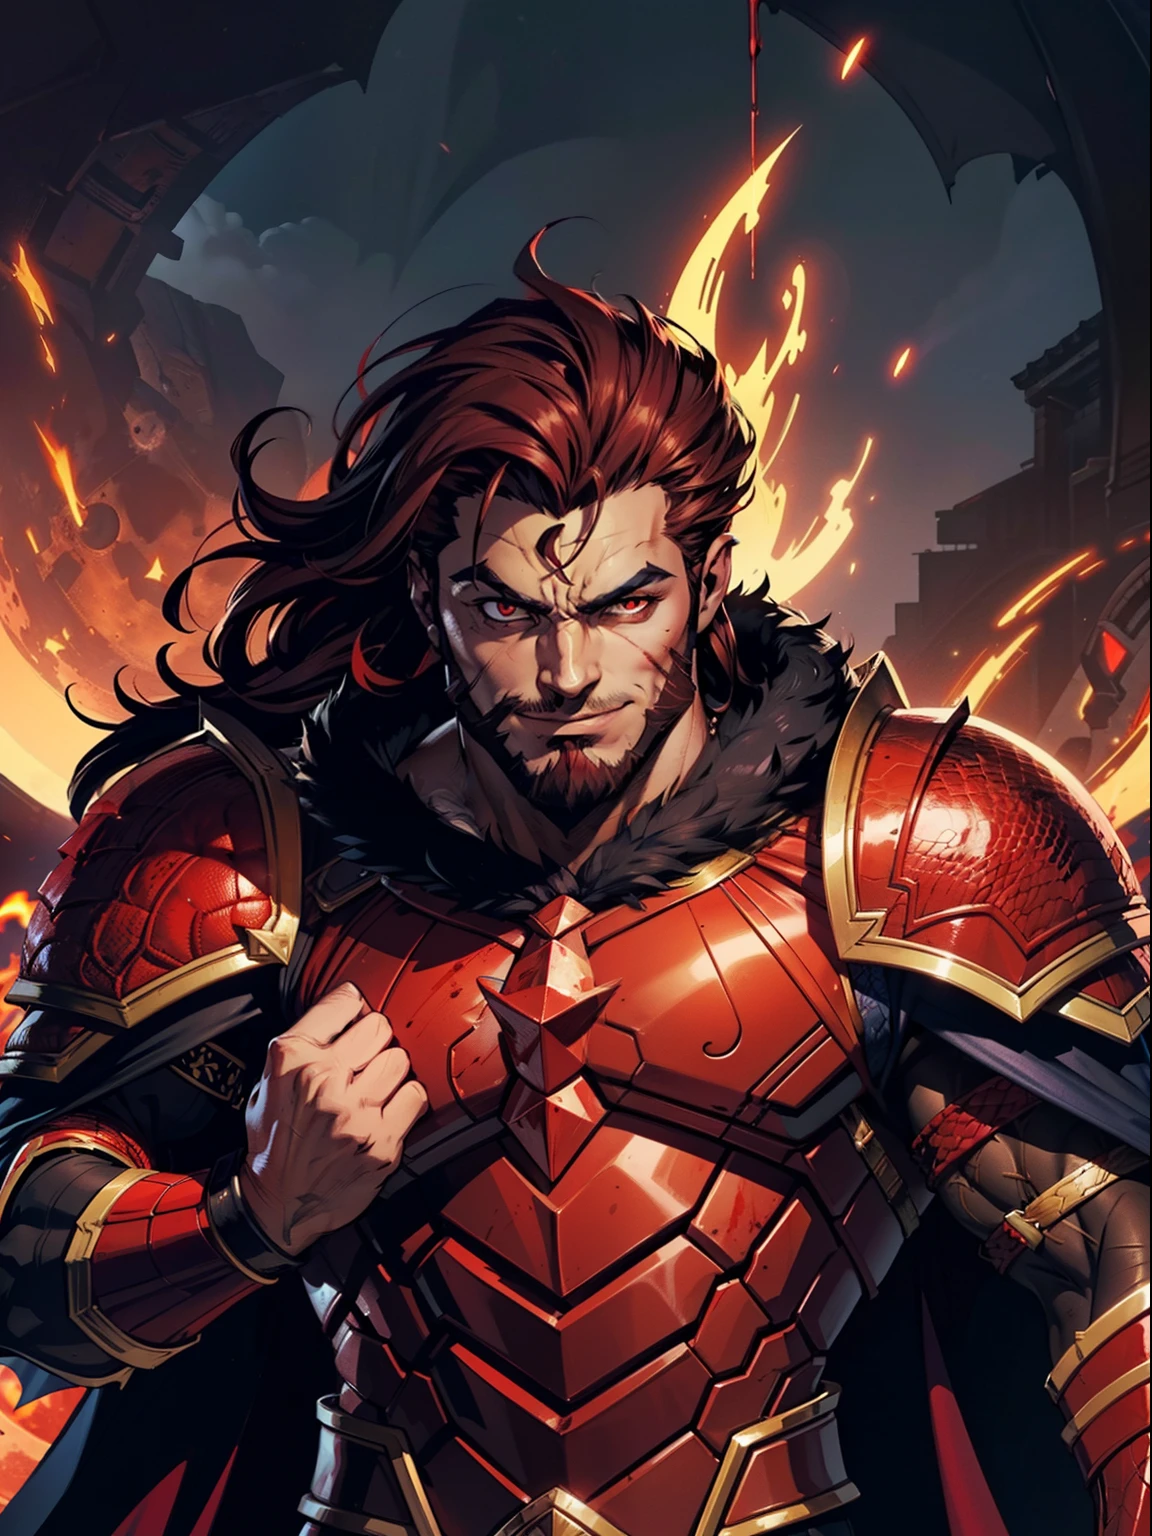 Dark night blood moon background, Hades style, game portrait, Sadurang from Marvel, hunk, buffed physics, short mane hair, mullet, defined face, detailed eyes, short beard, glowing red eyes, dark hair, wily smile, badass, dangerous, wearing full armor with red dragon scales, cape of furs